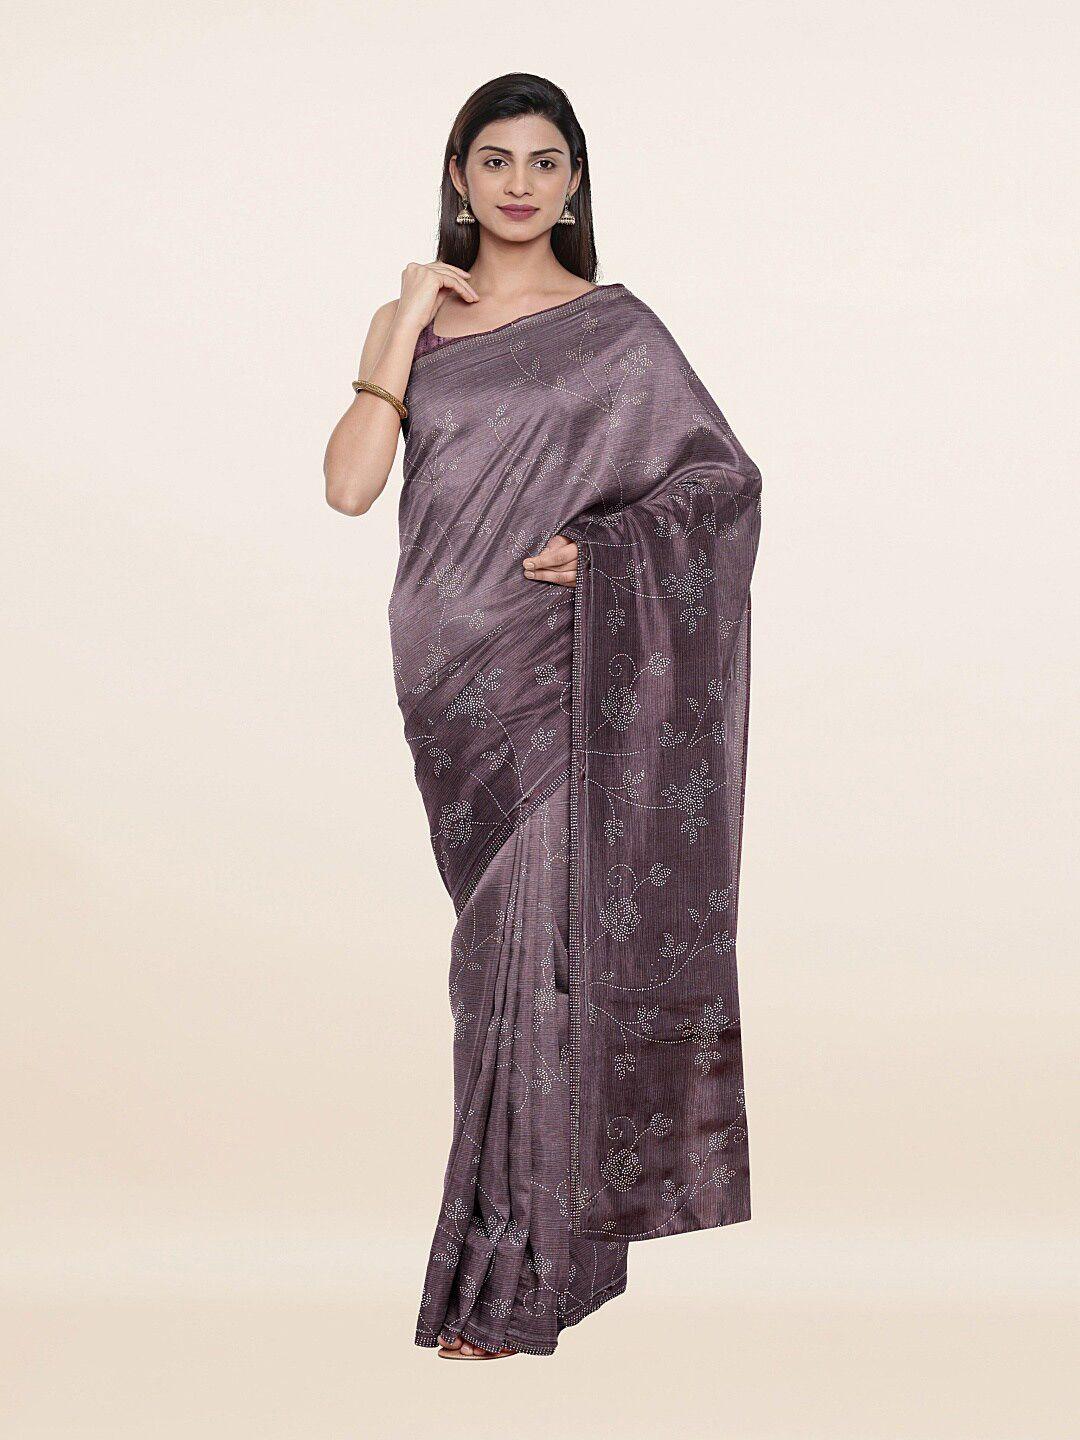 pothys lavender & silver-toned floral beads and stones saree